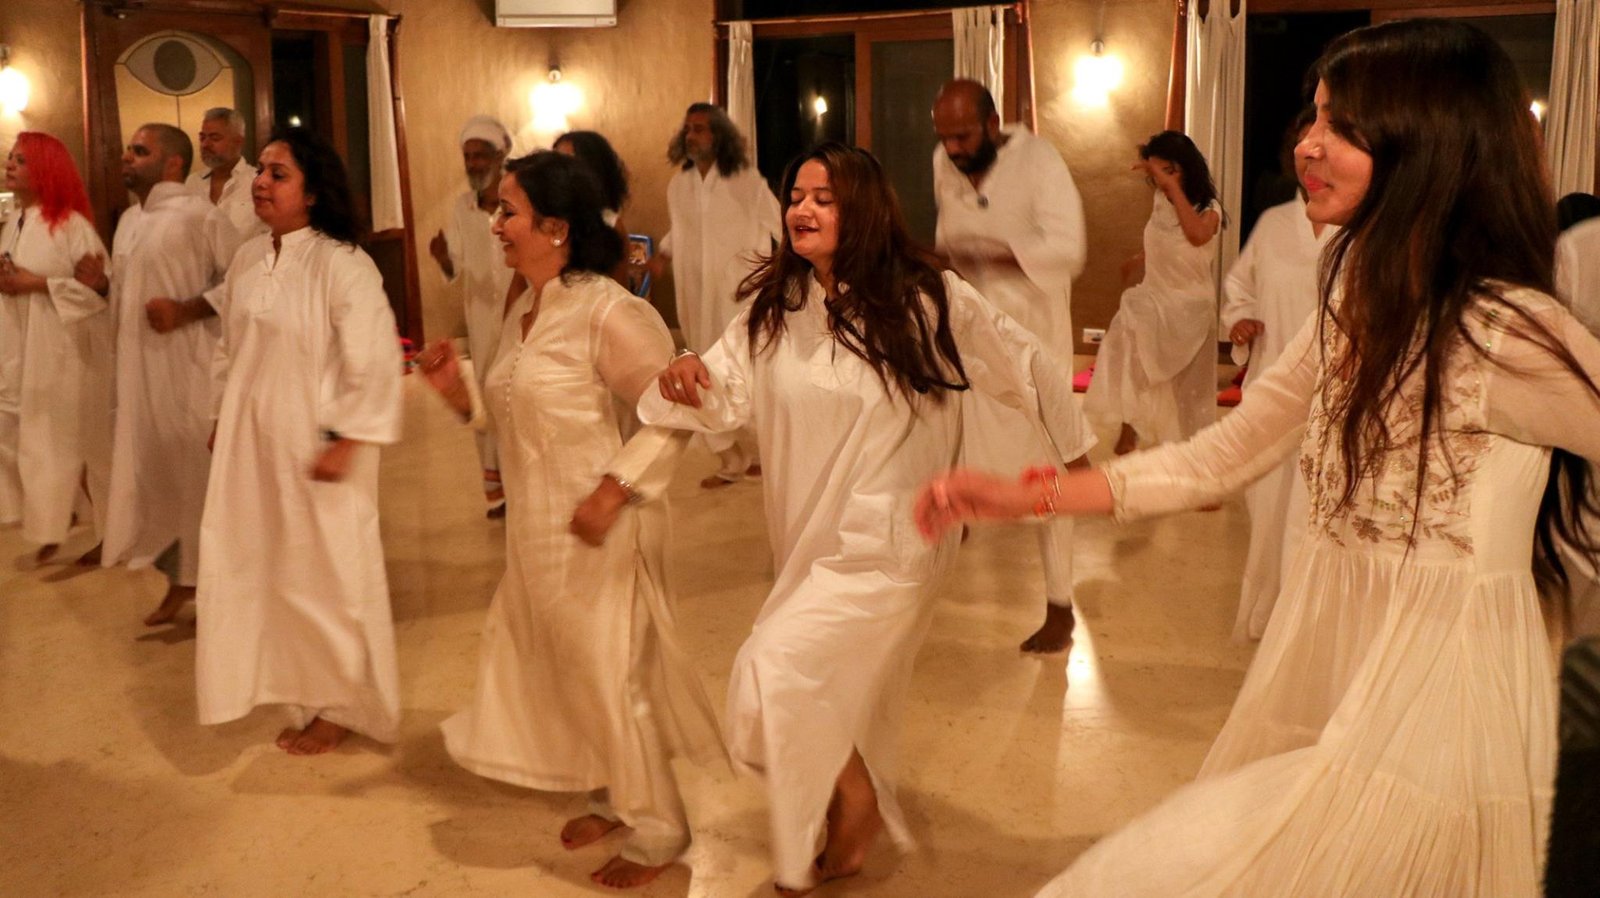 Meditate while you dance at this spiritual dance festival At Zorba The Buddha